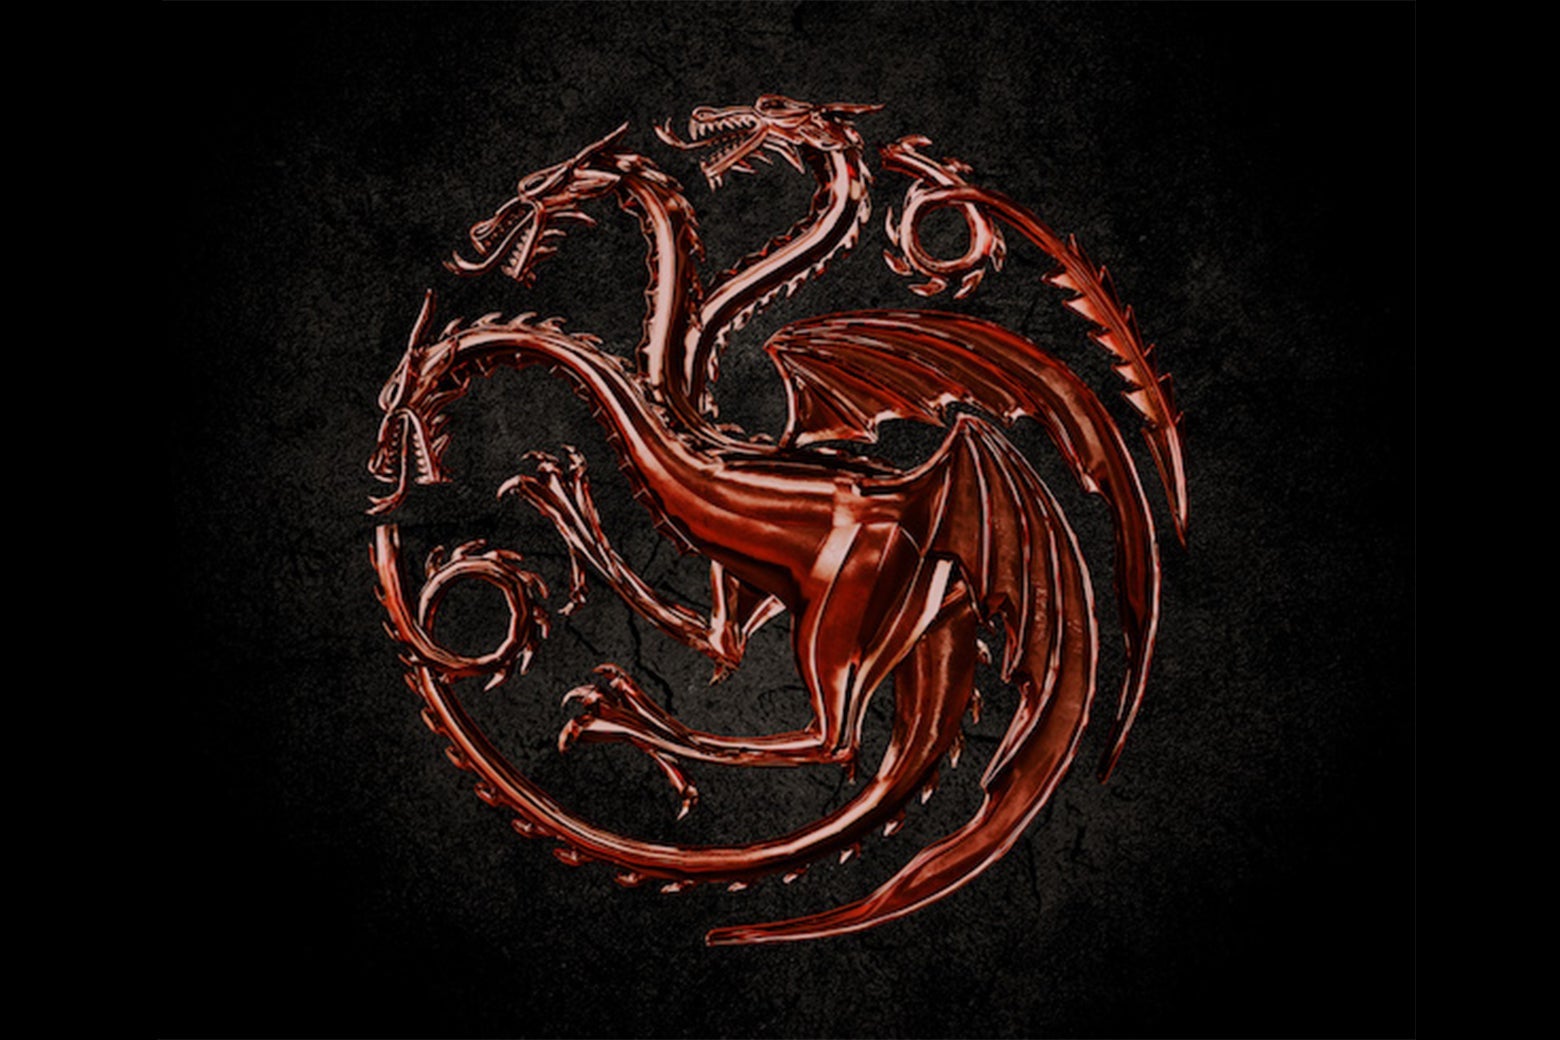 The seal of House Targaryen from Game of Thrones, a three-headed dragon.